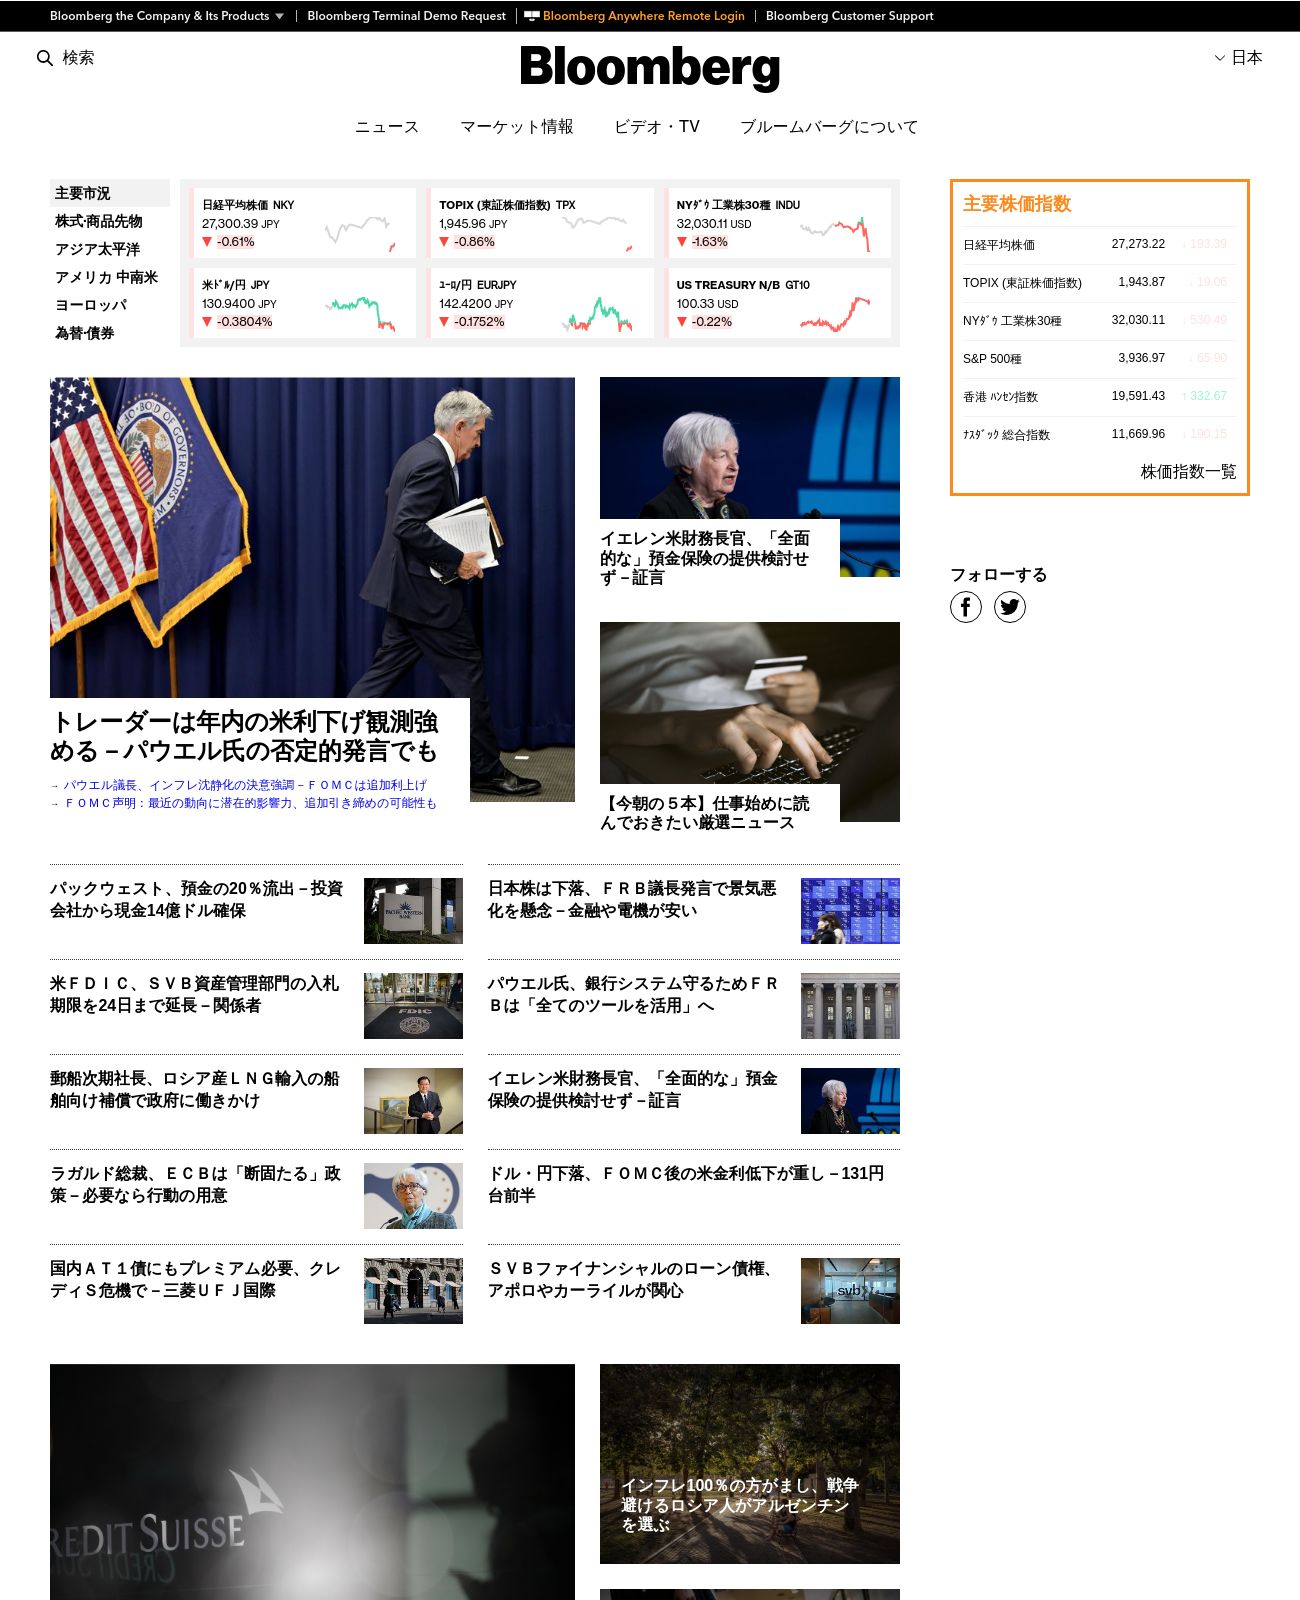 Bloomberg Japan at 2023-03-23 09:59:01+09:00 local time